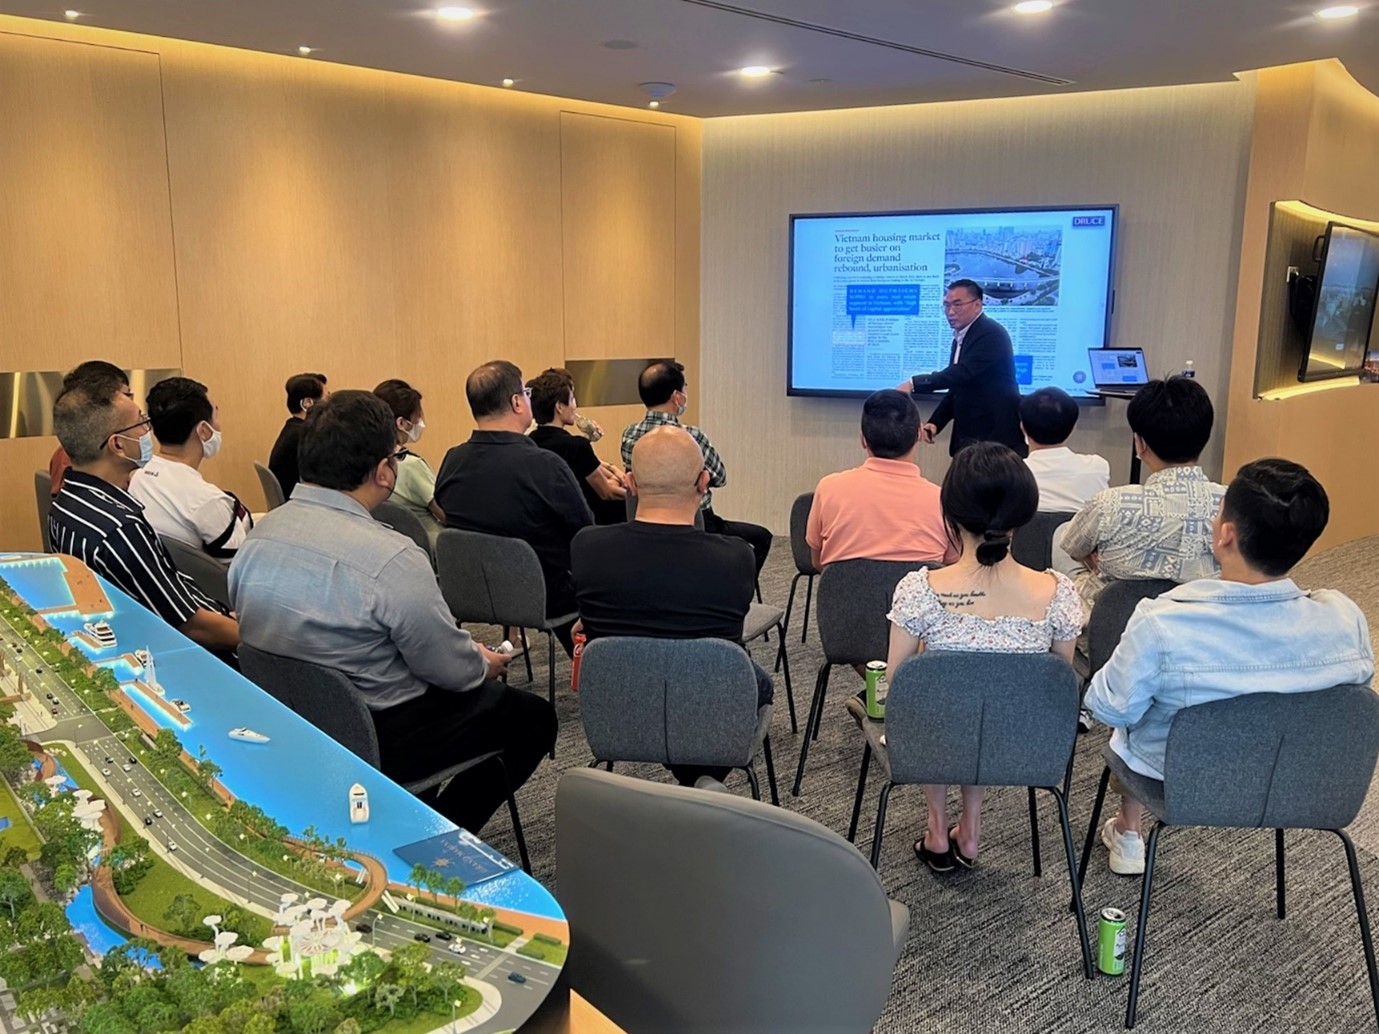 In September 2022, Druce organized VIP consulting sessions in Singapore to introduce Marriott branded residential apartments in Vietnam.